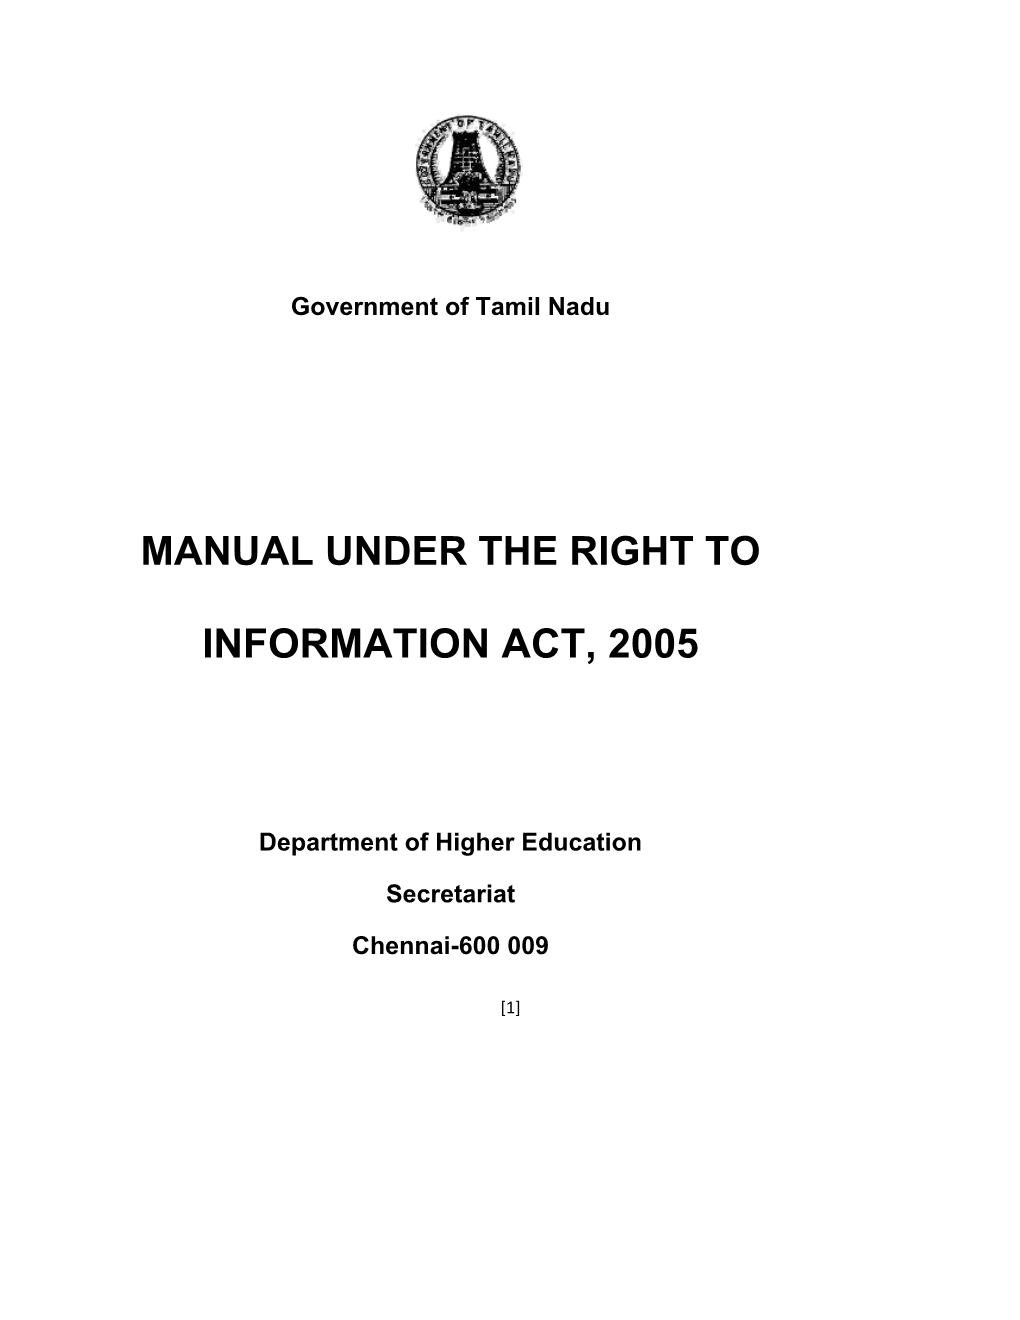 Manual Under the Right To